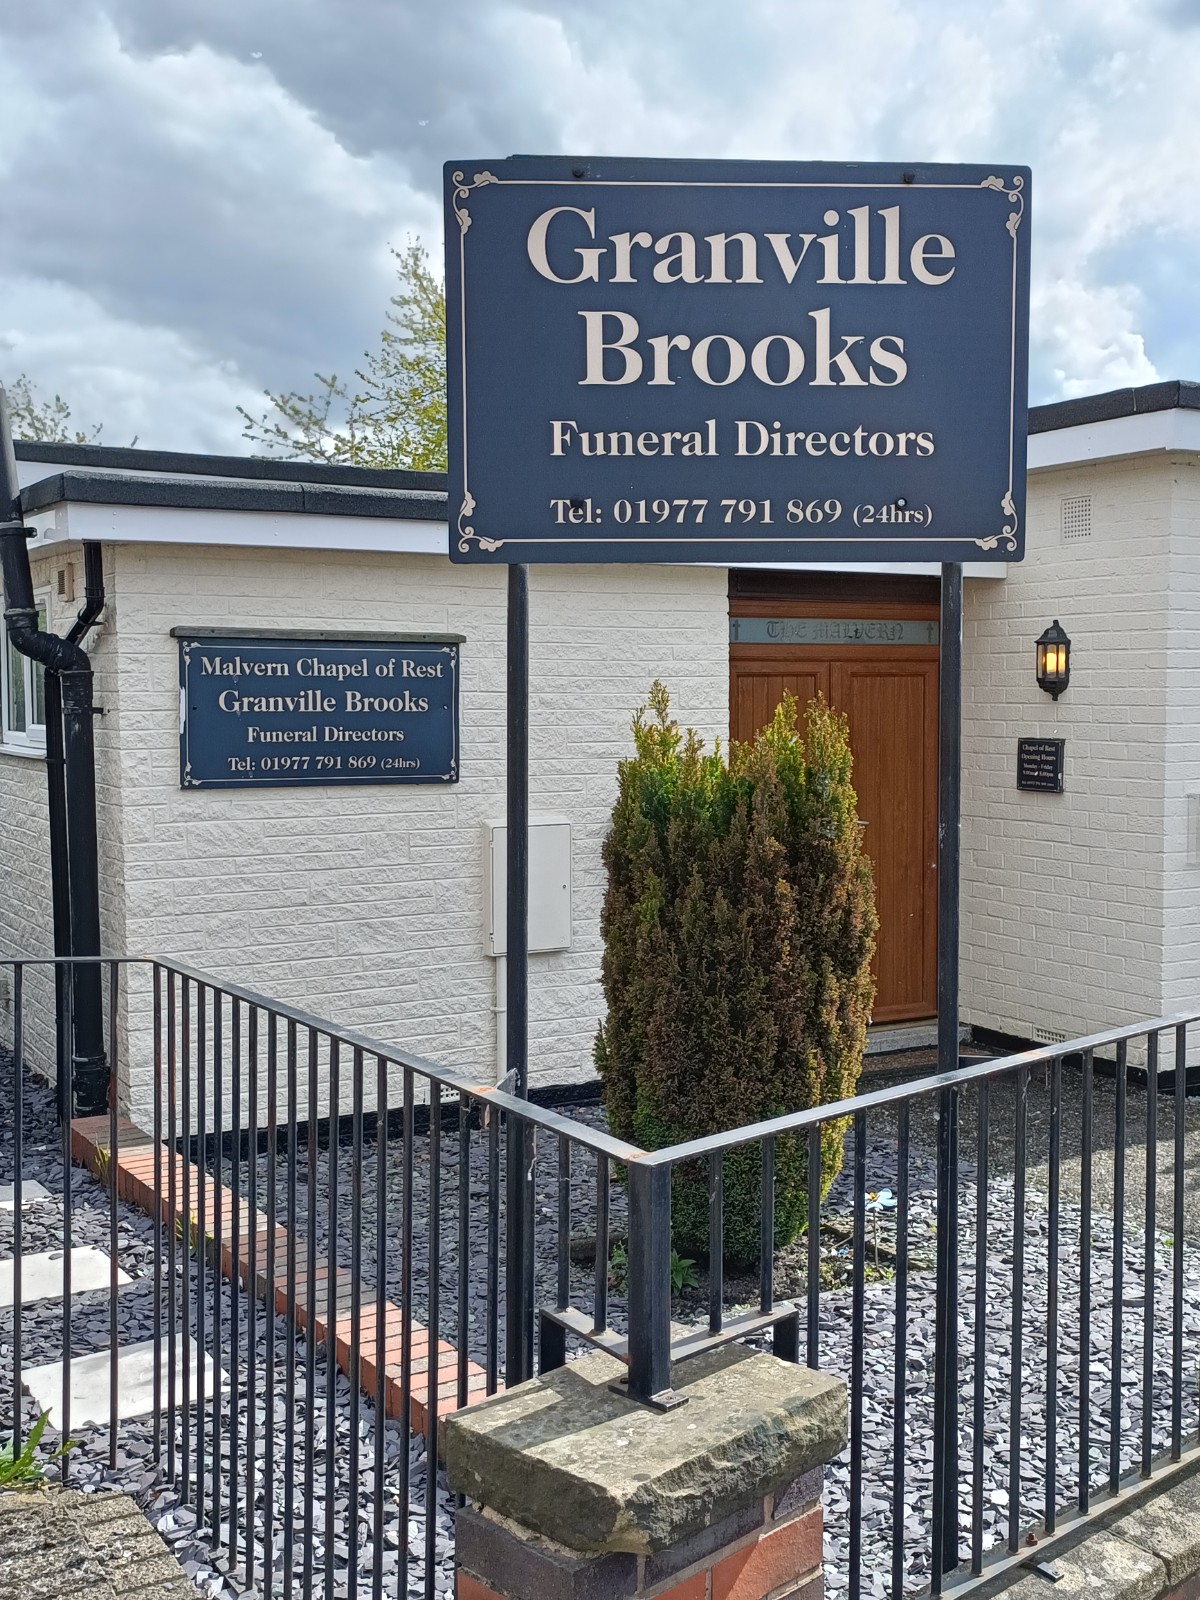 image of the outside premises of Granville Brooks